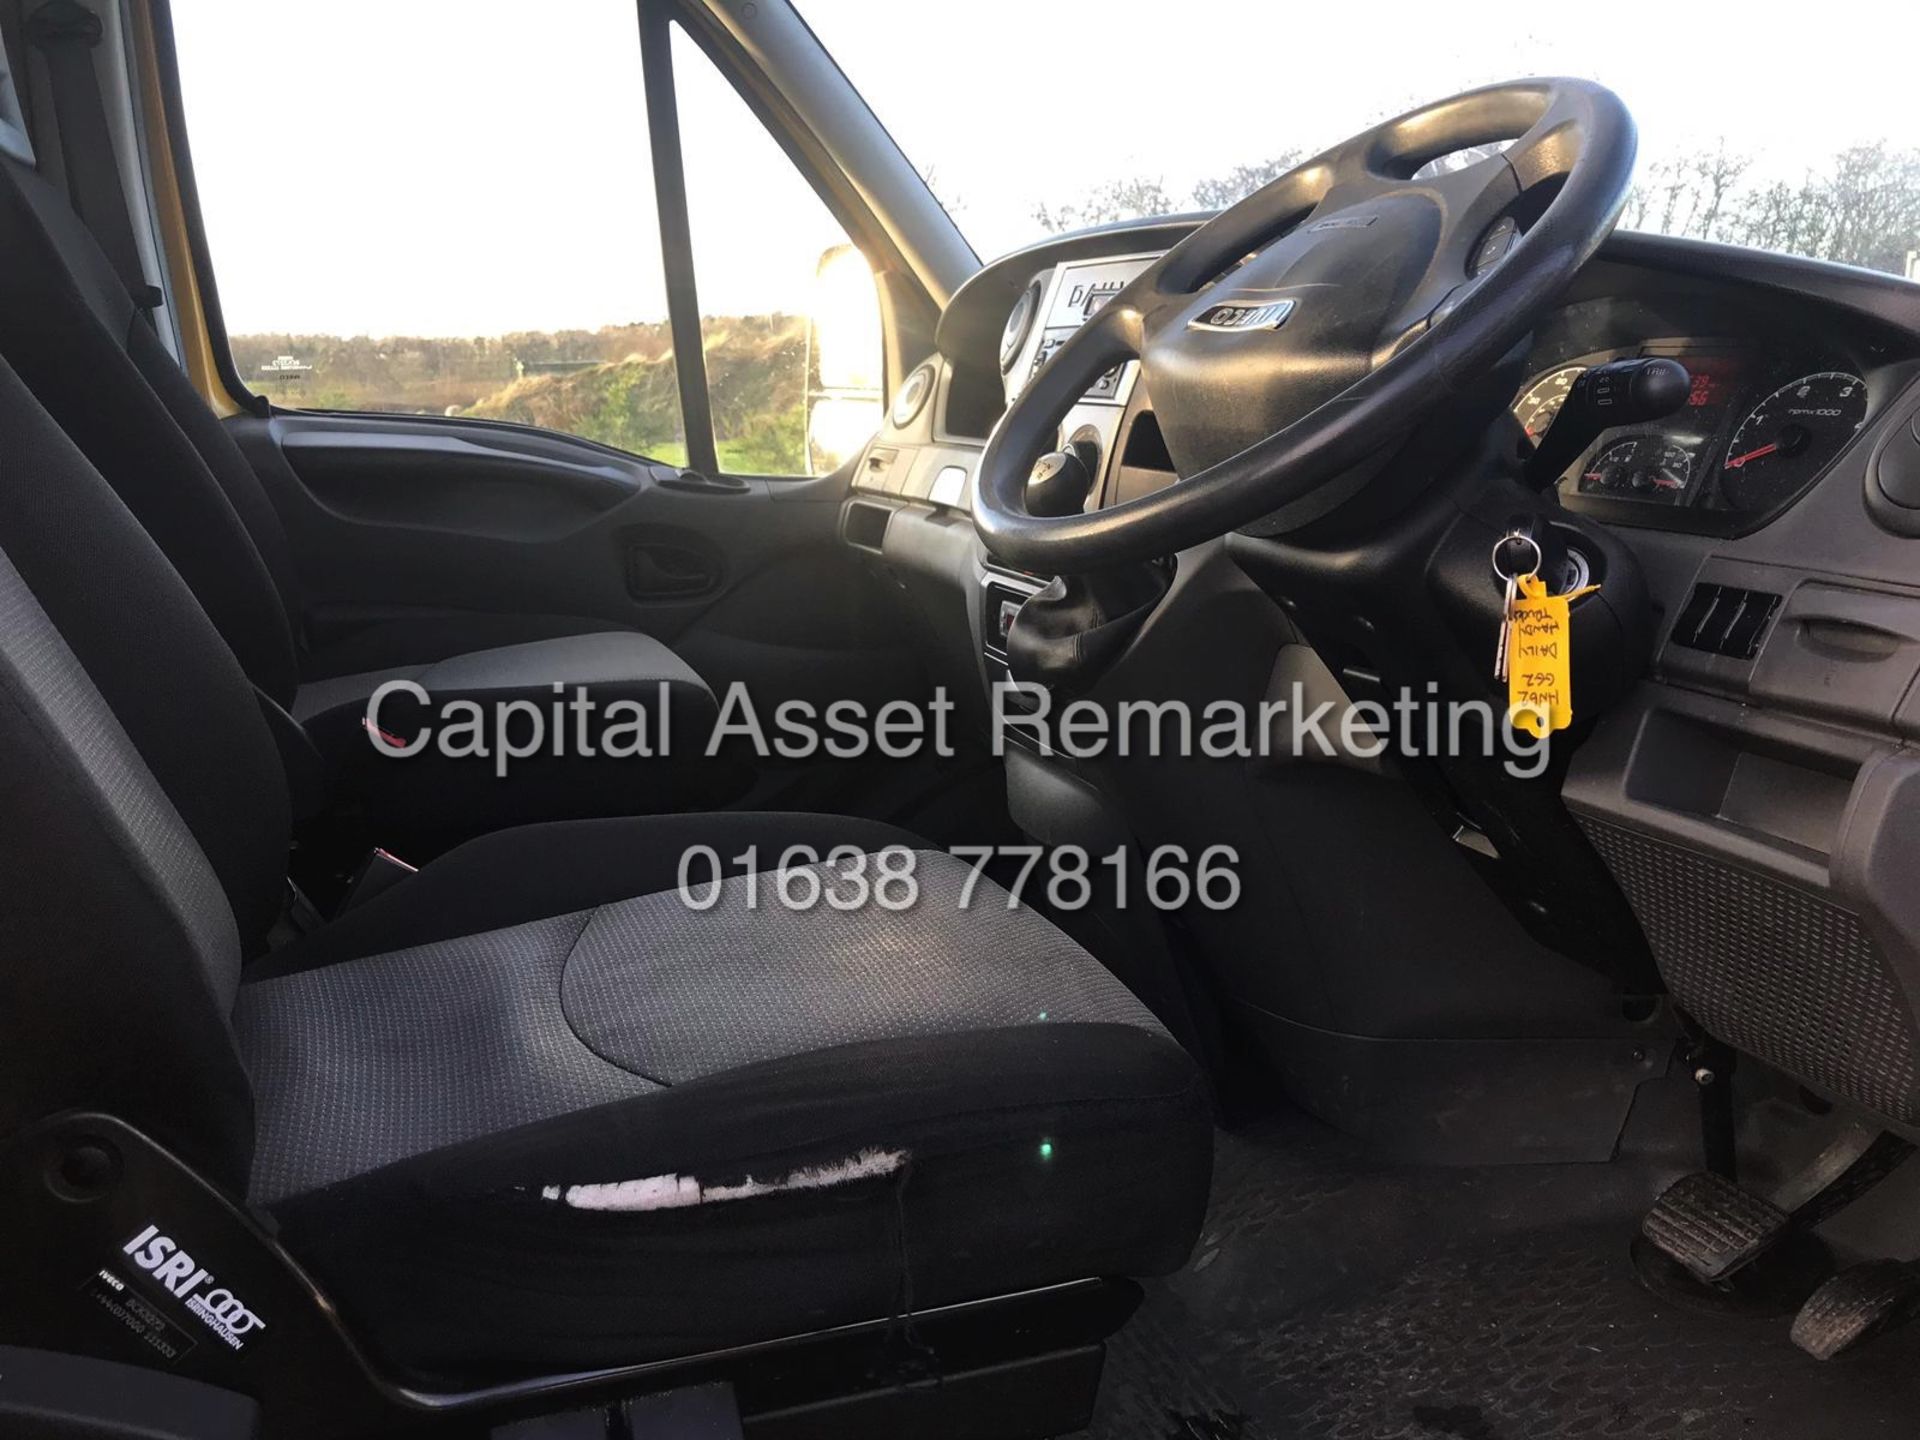 (ON SALE) IVECO DAILY 35S13 - CHASSIS CAB - NEW SHAPE - 2013 MODEL - LONG MOT - IDEAL RECOVERY TRUCK - Image 4 of 11